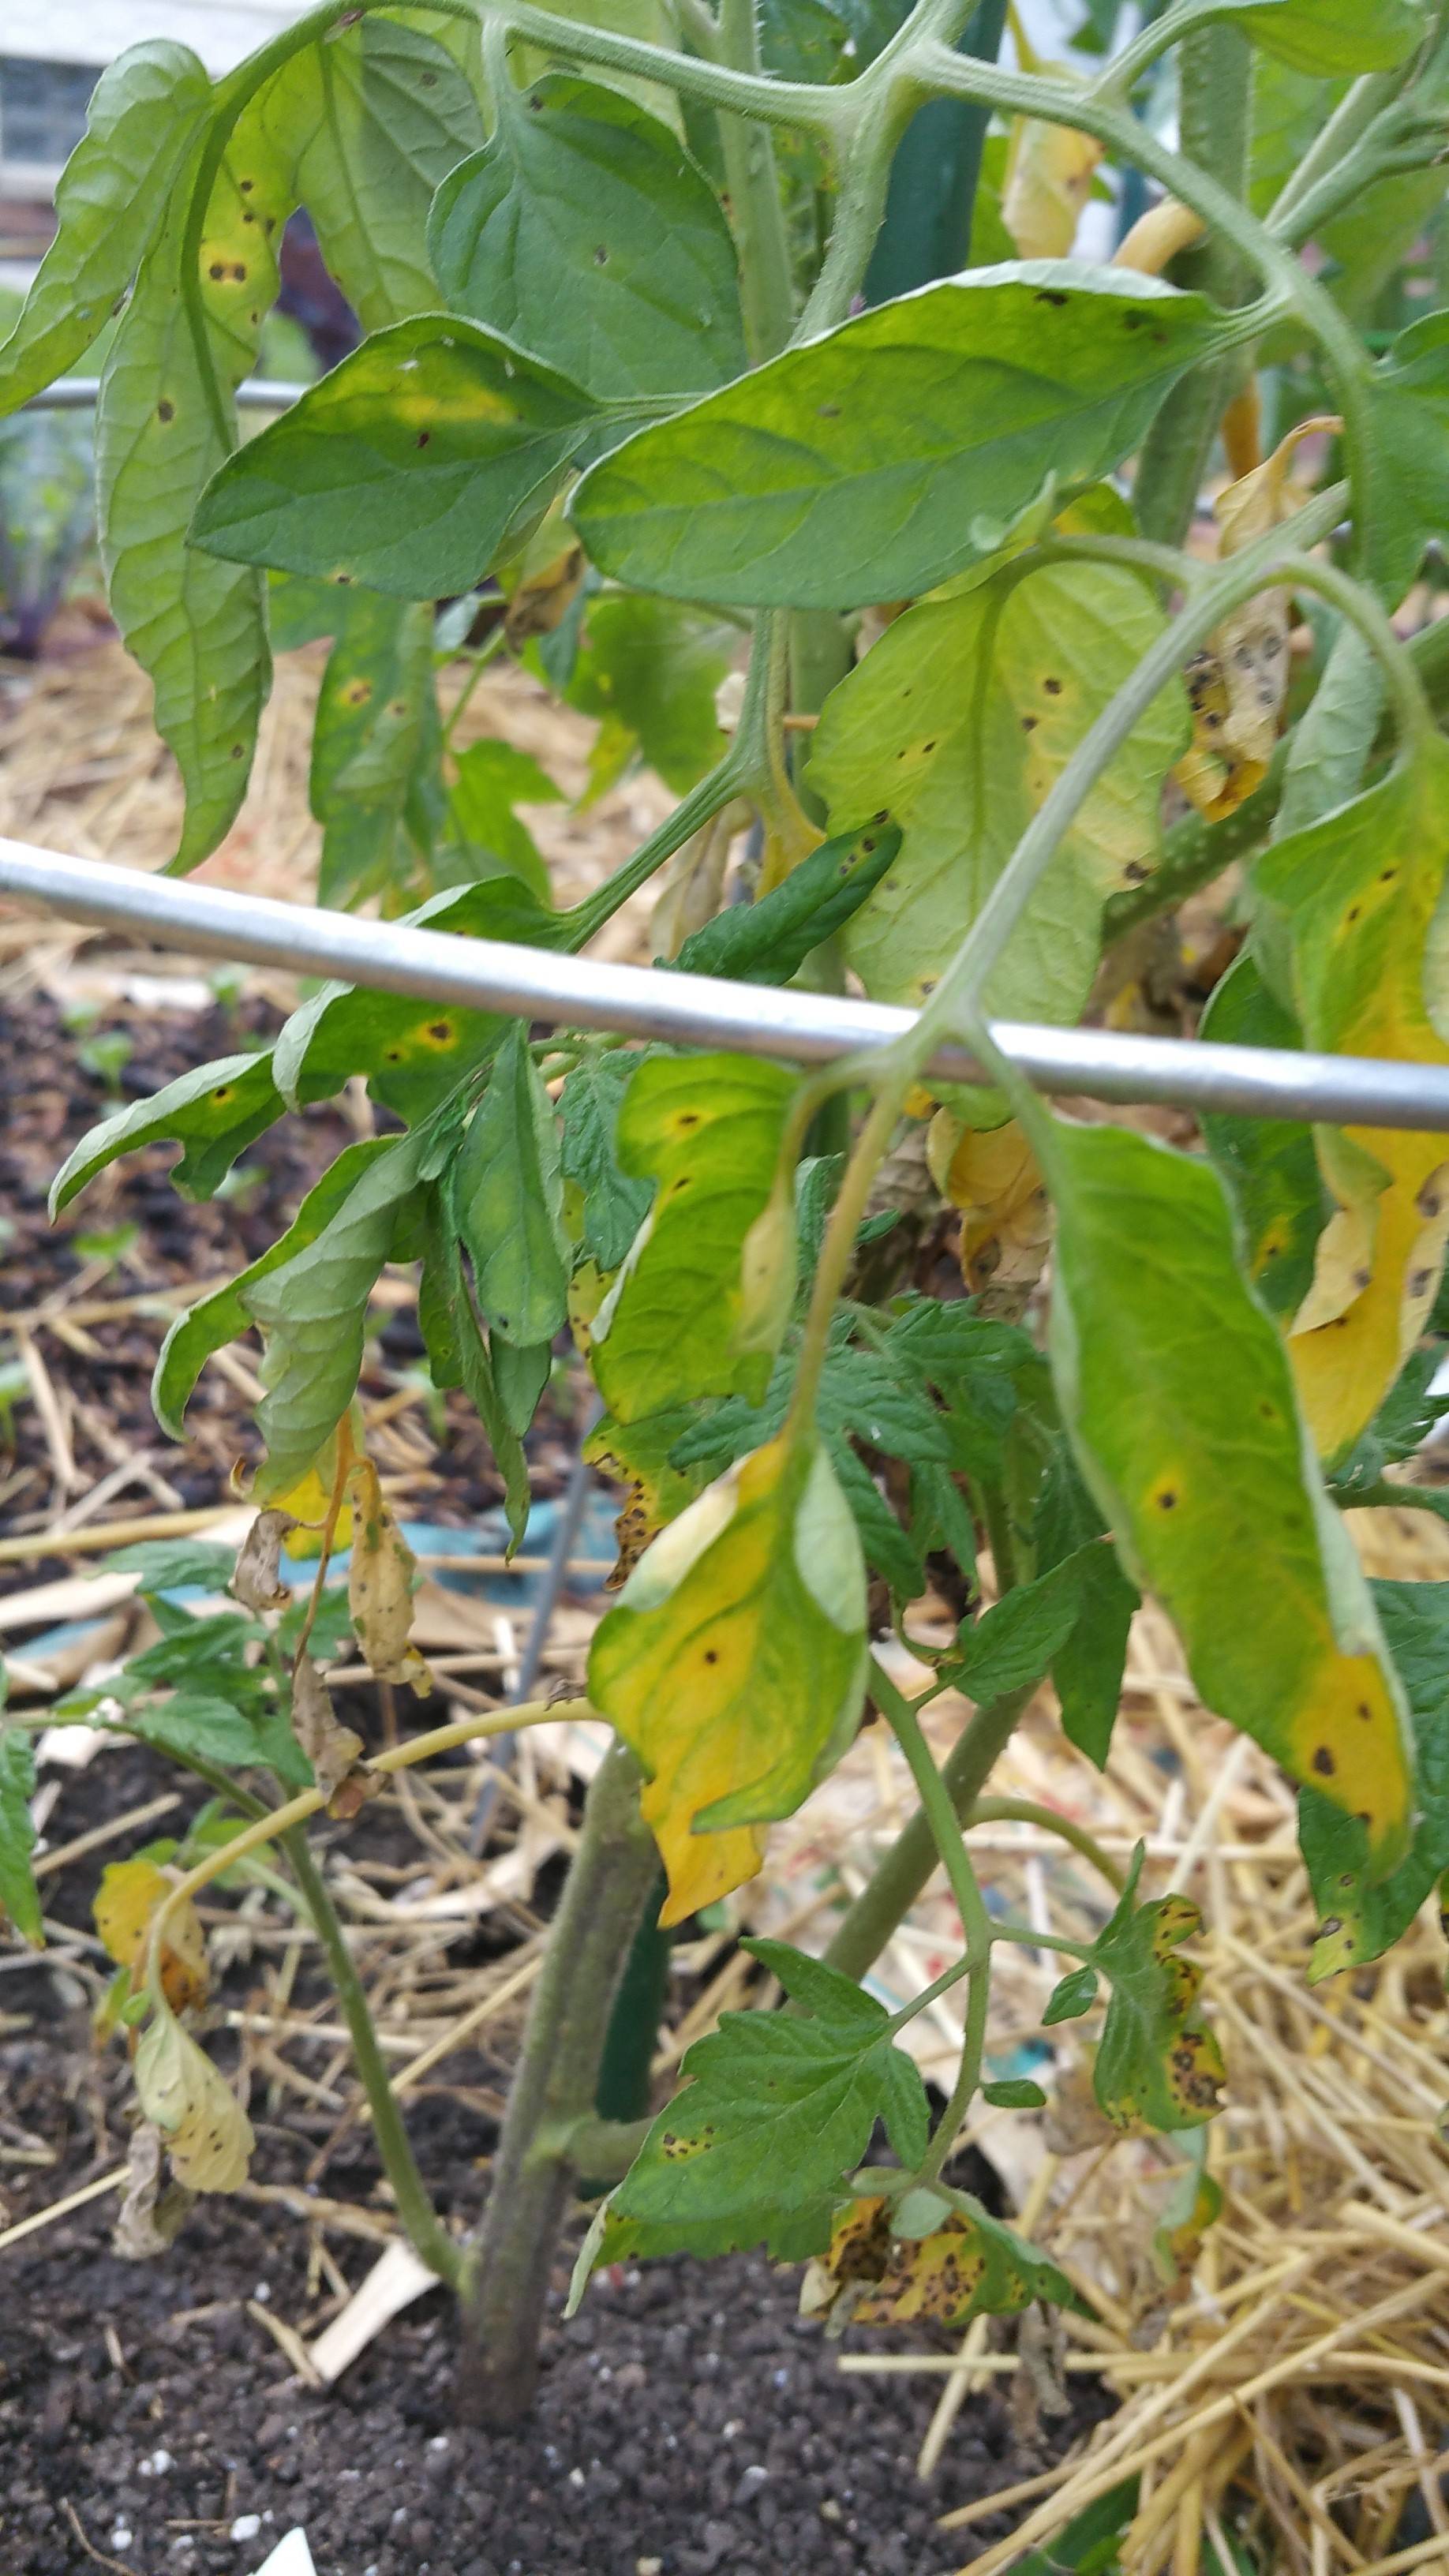 diagnosis - What's wrong with my tomato plant? - Gardening ...